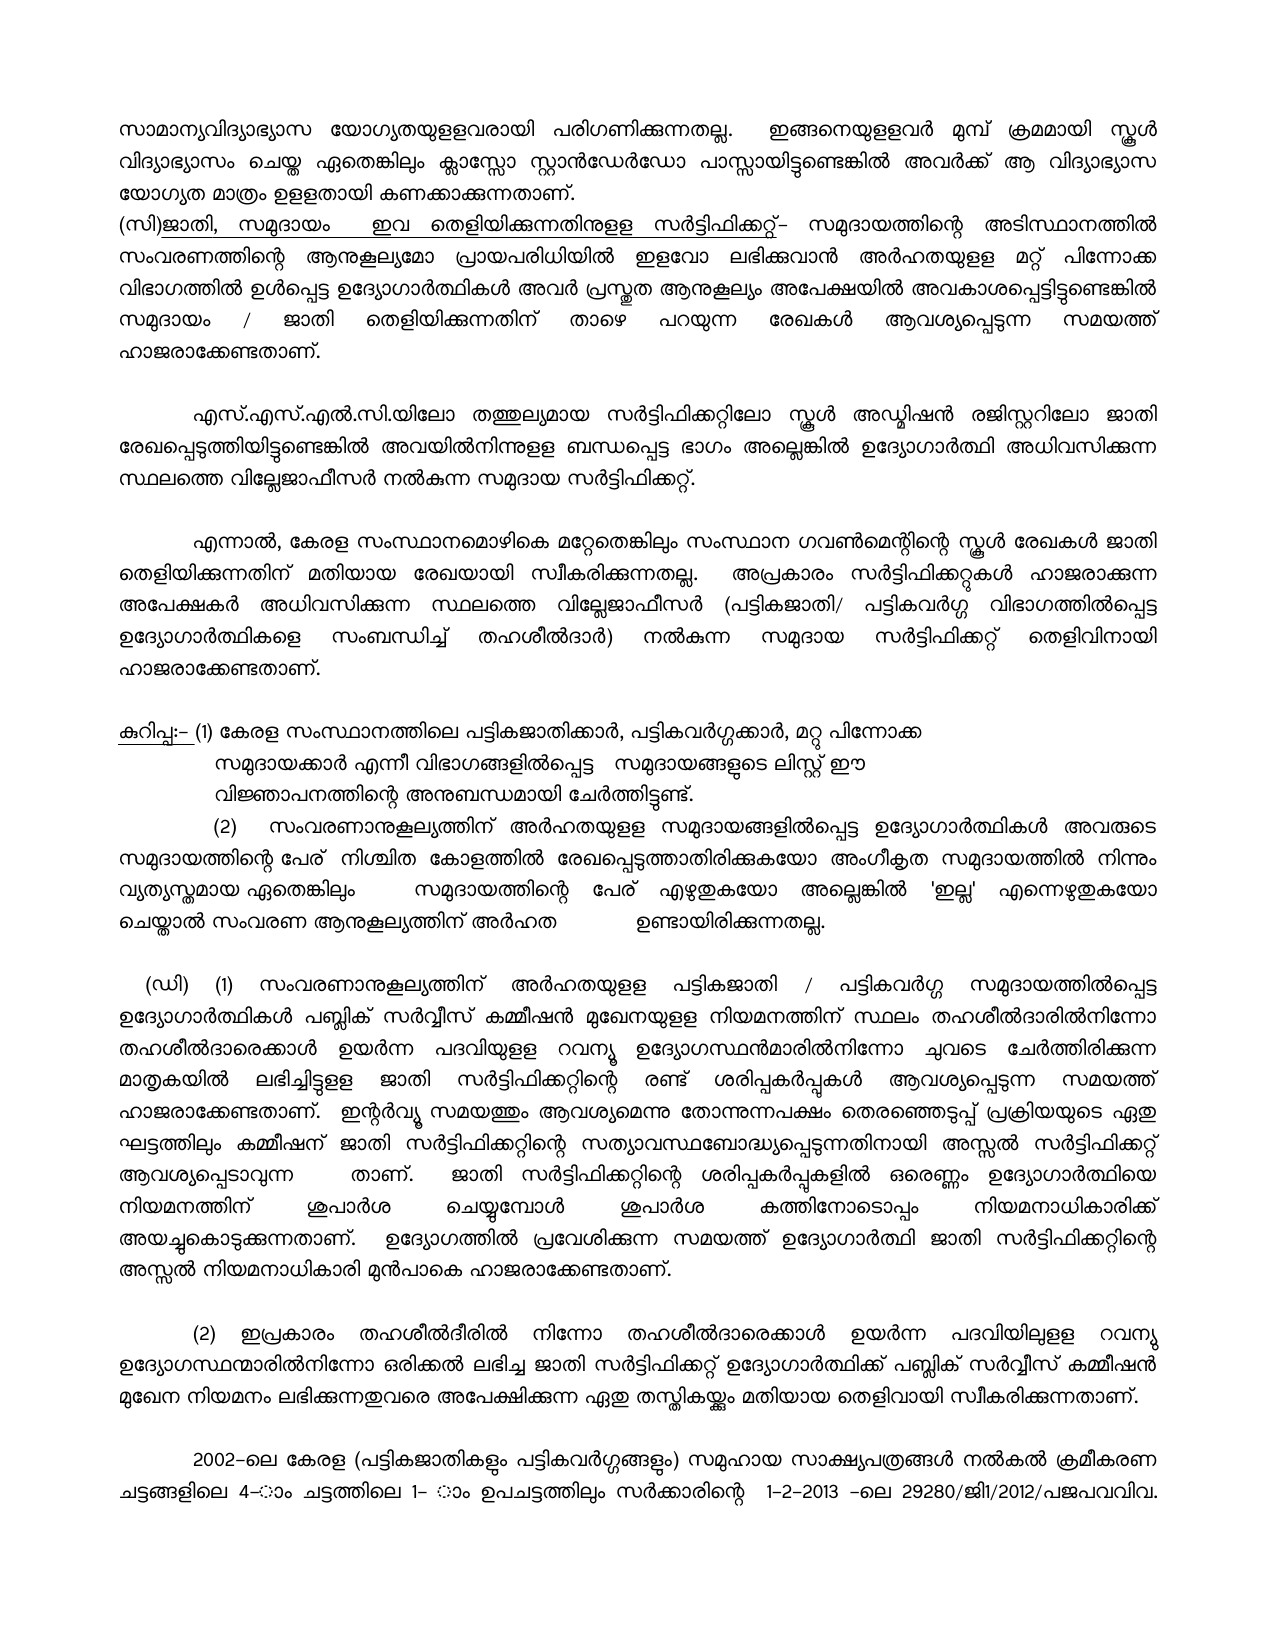 General Conditions and Certificate Formats in Malayalam - Notification Image 14